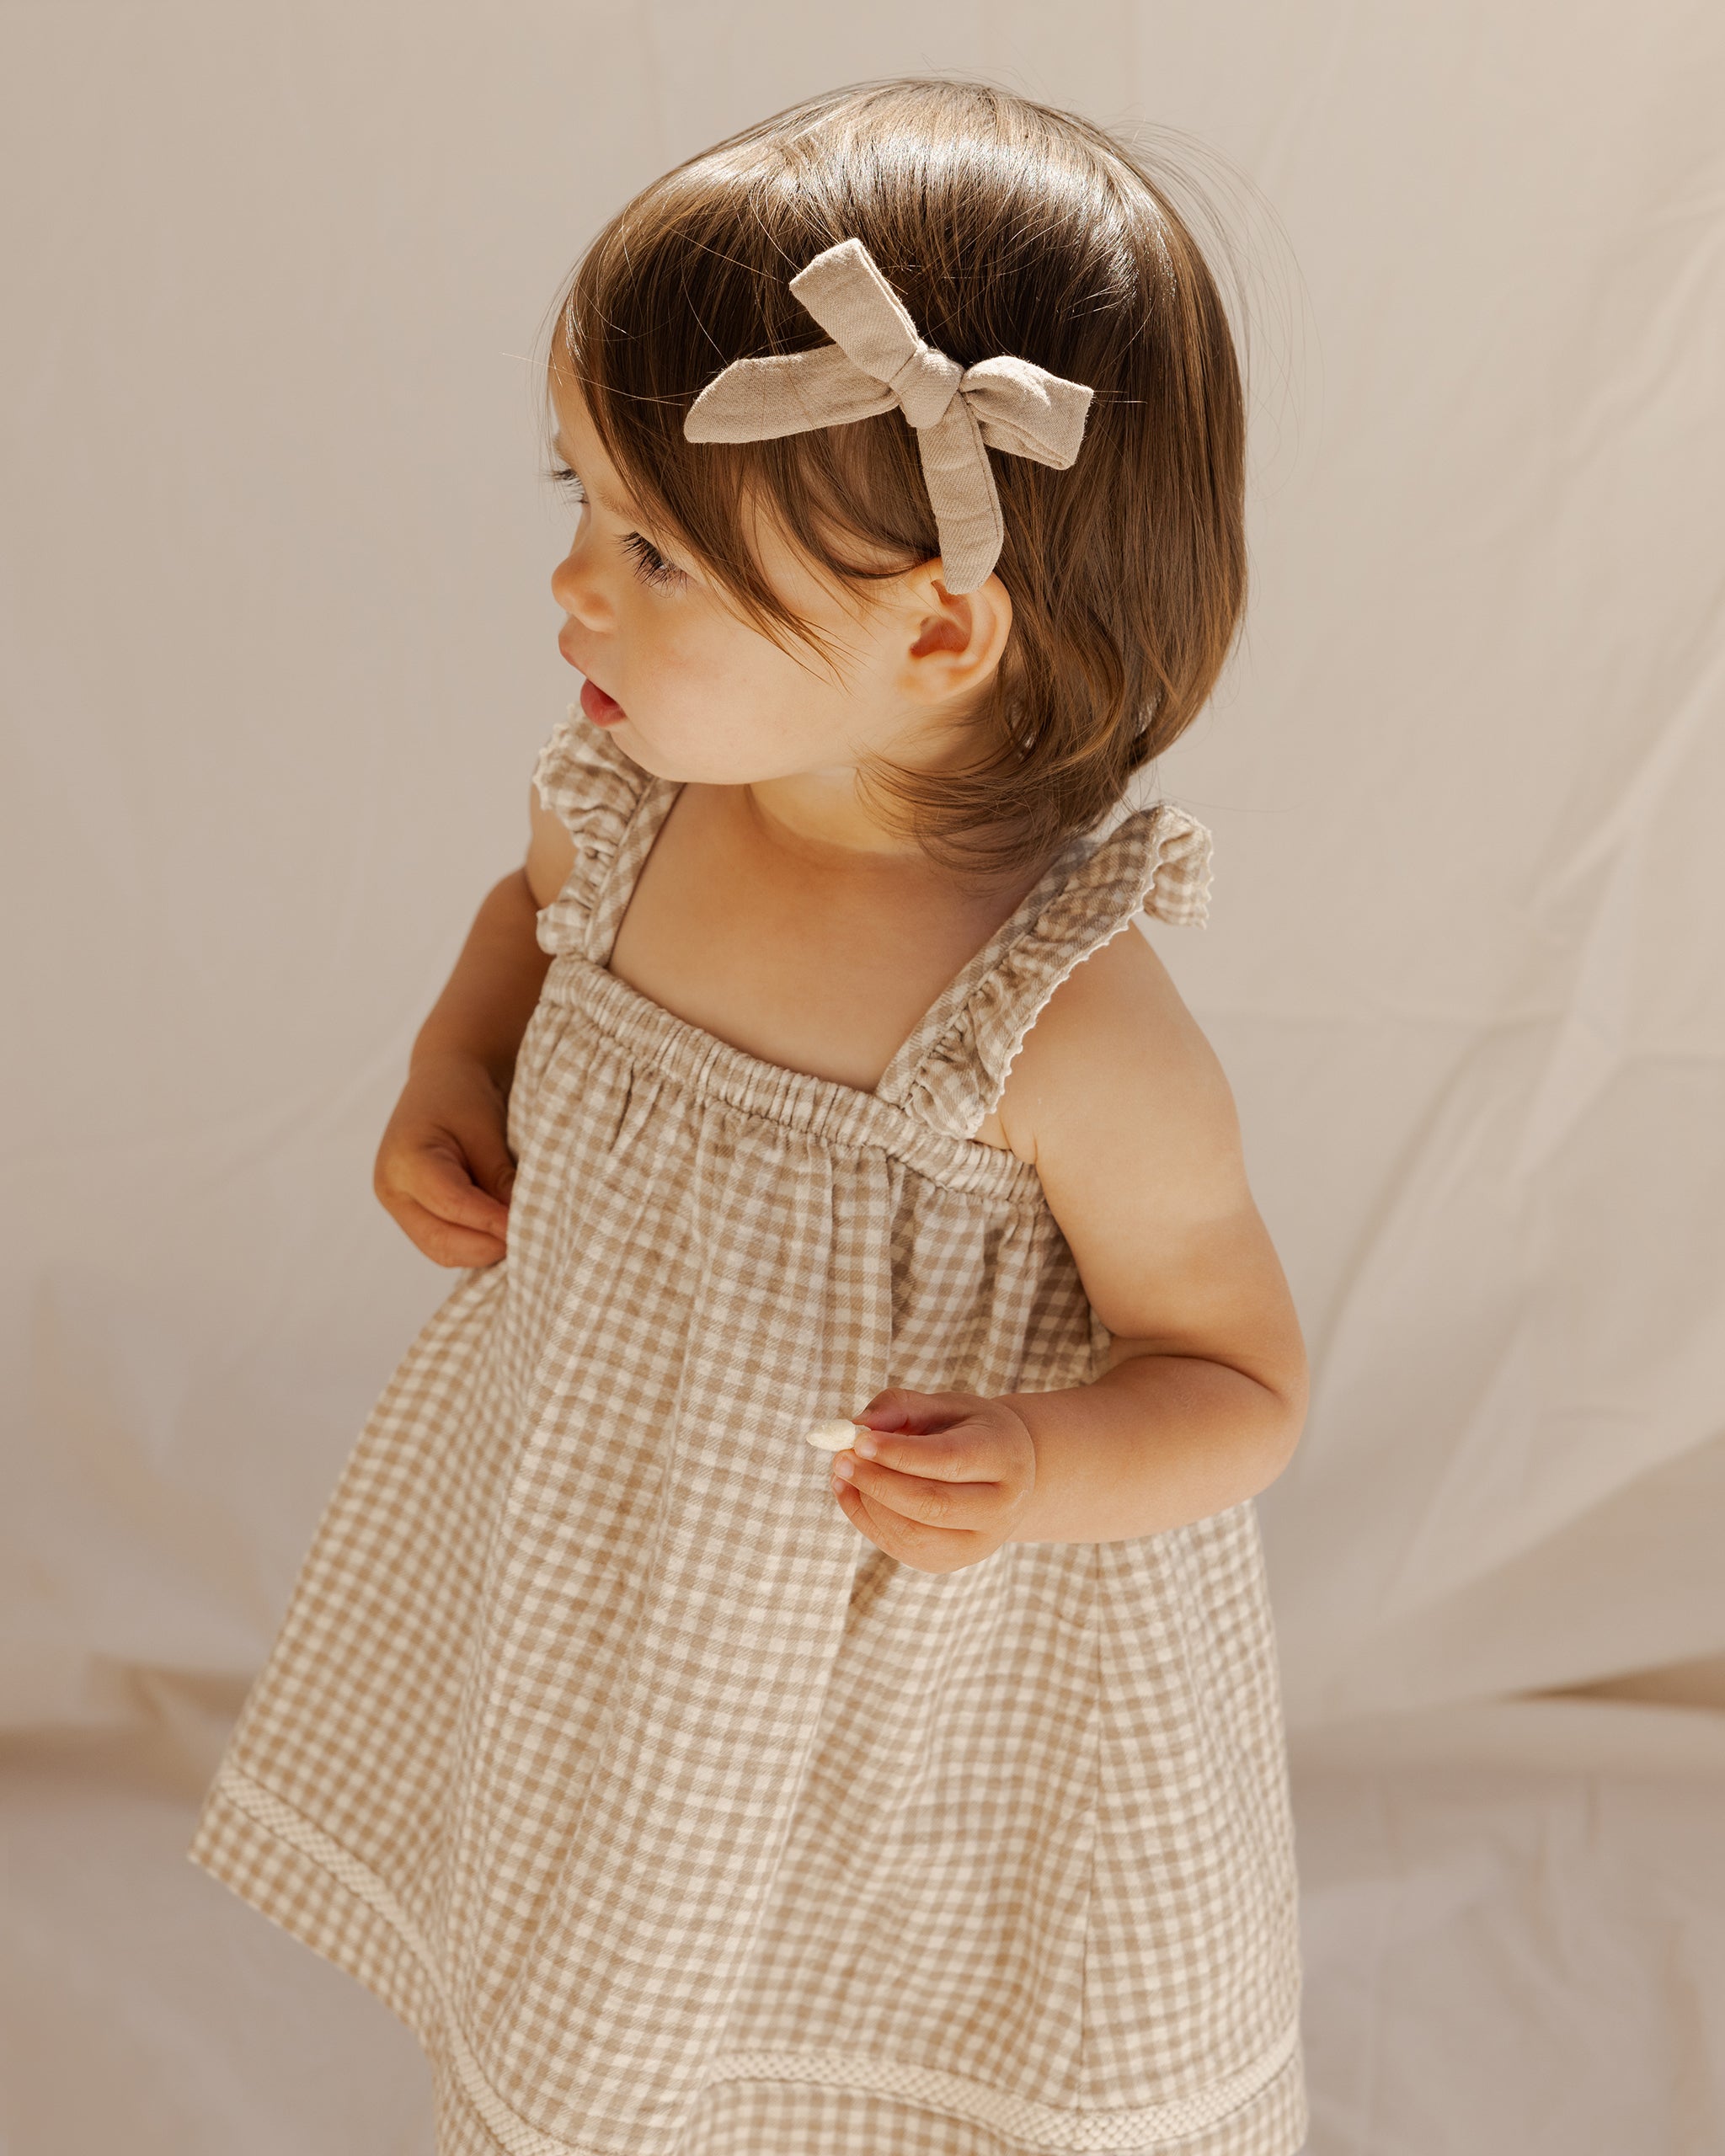 Ruffle Tank Dress || Oat Gingham - Rylee + Cru | Kids Clothes | Trendy Baby Clothes | Modern Infant Outfits |